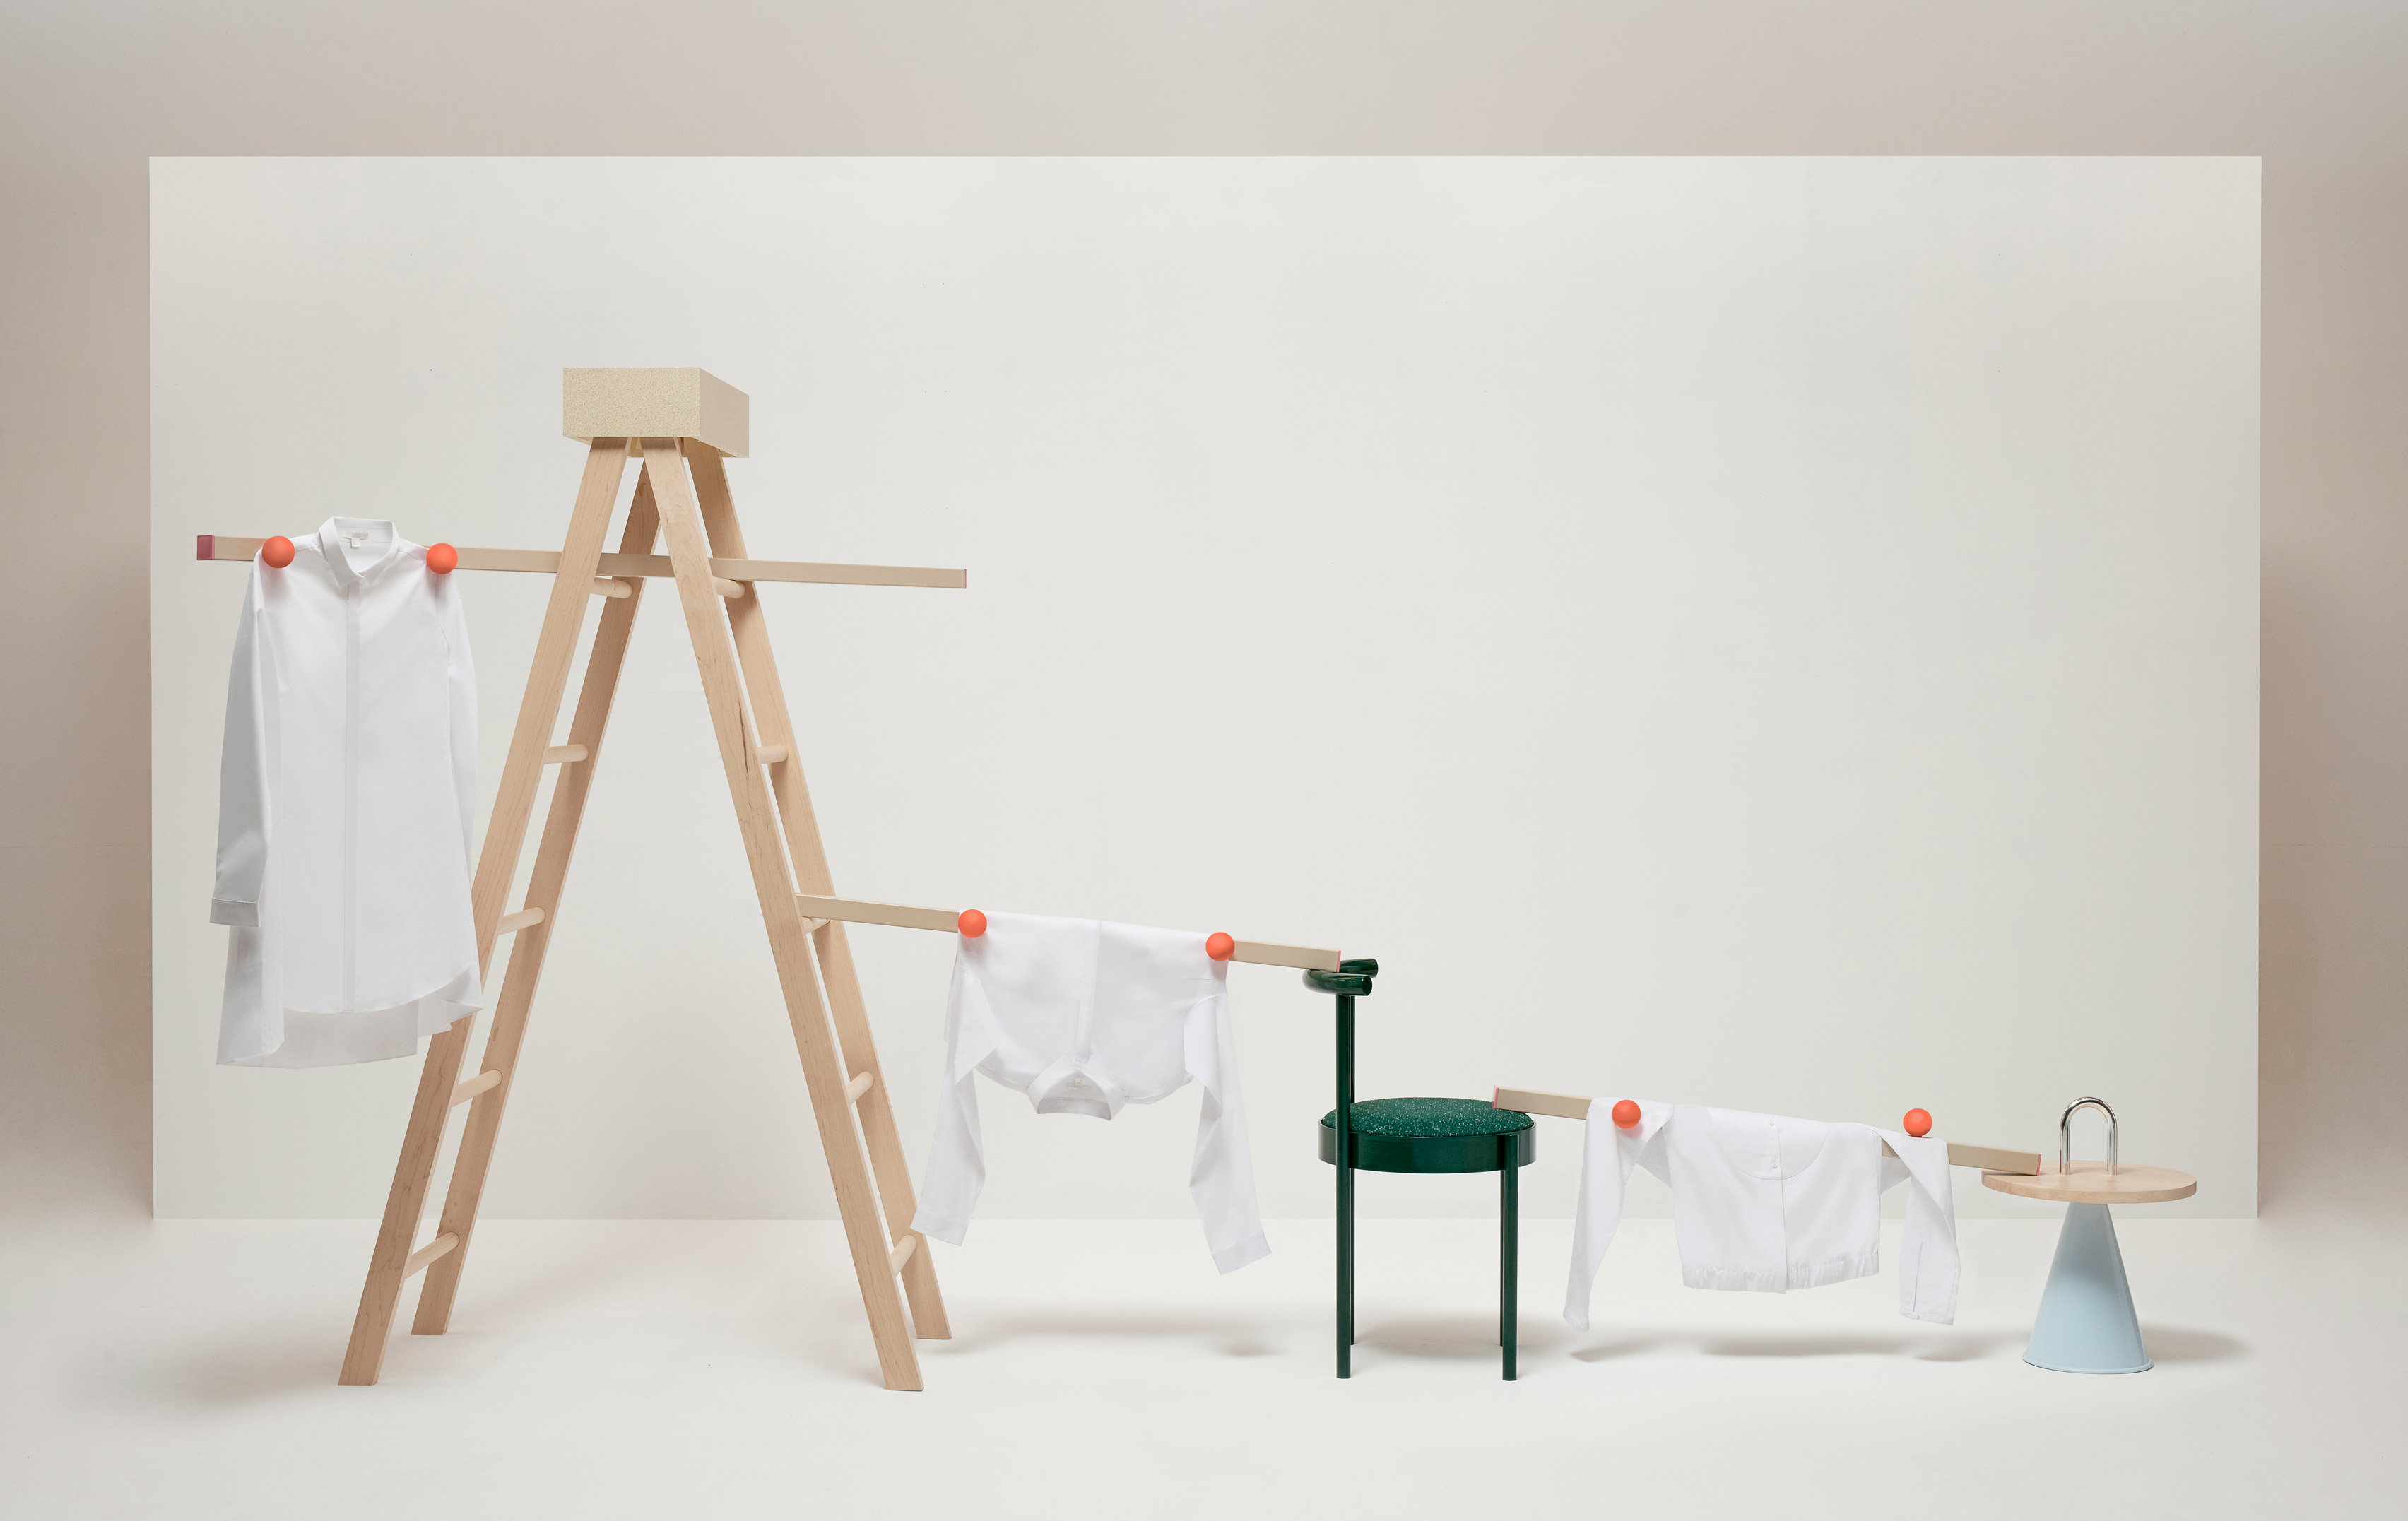 COS and Daniel Emma emphasise the classic white shirt with set of installations